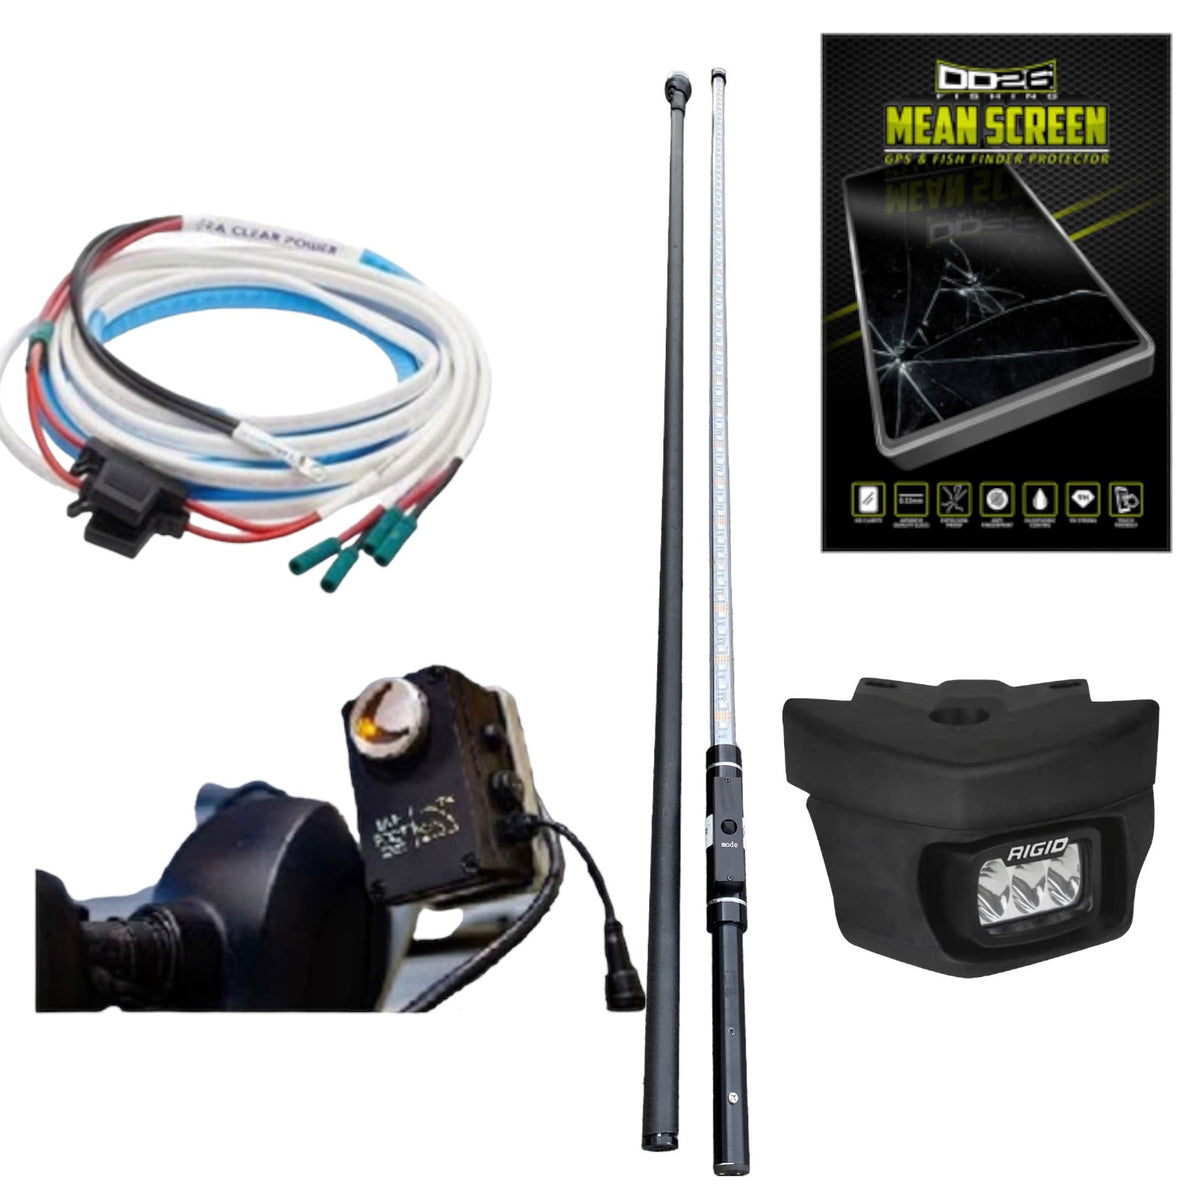 Electronic Accessories, Lights and Live Foot – Tagged FFS Directional – DD26  Fishing